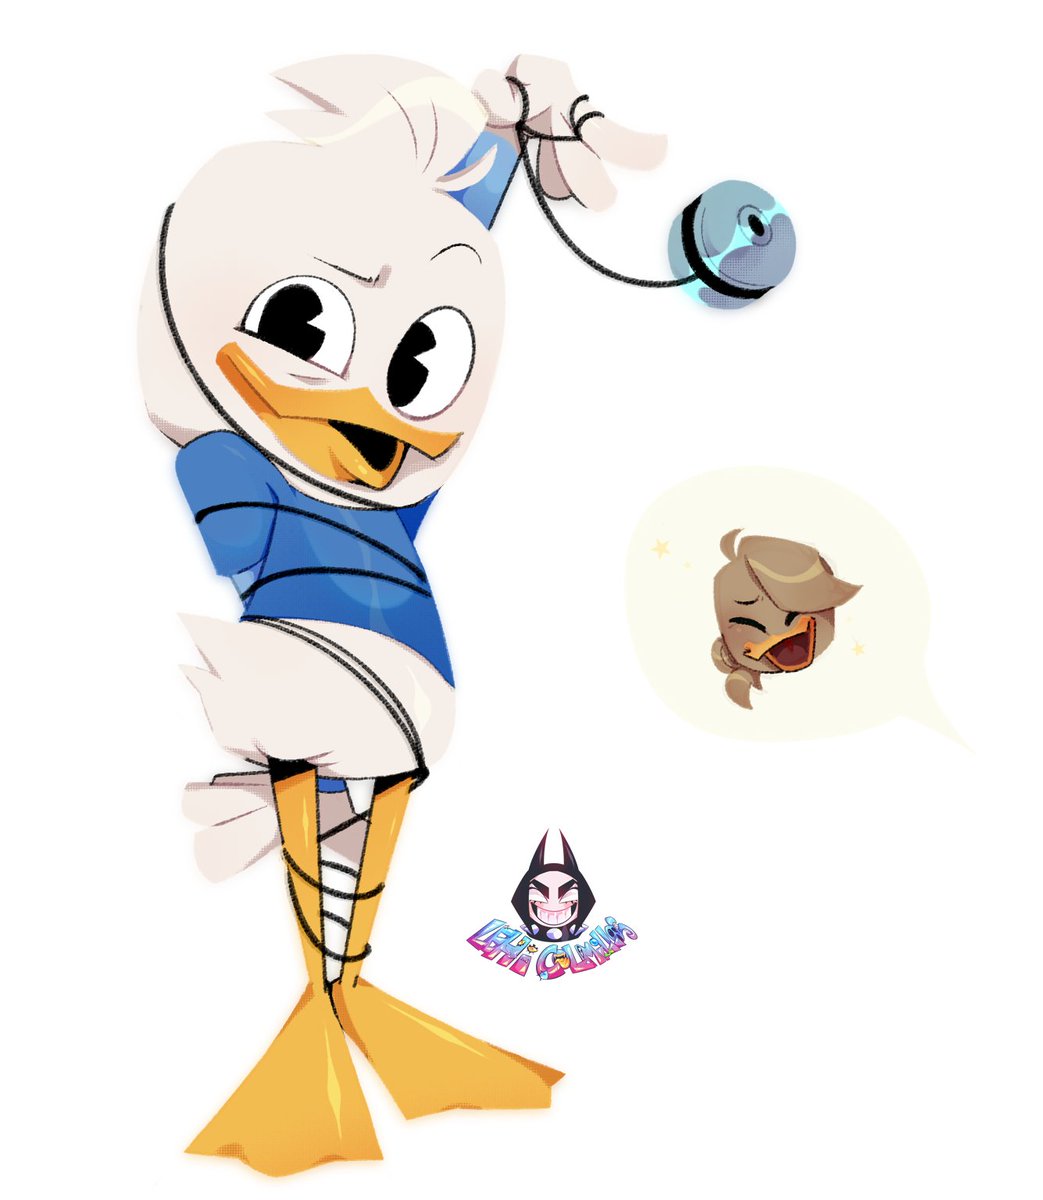 I made this drawing of dewey and a small @ KhionYohann      (she have already seen it, and I feel a little sorry to show it to you here too) 😅✨🖤

I hope you like it!! 

#ducktalesfanart #ducktales #deweyduck #myart #lineless #DuckRaces